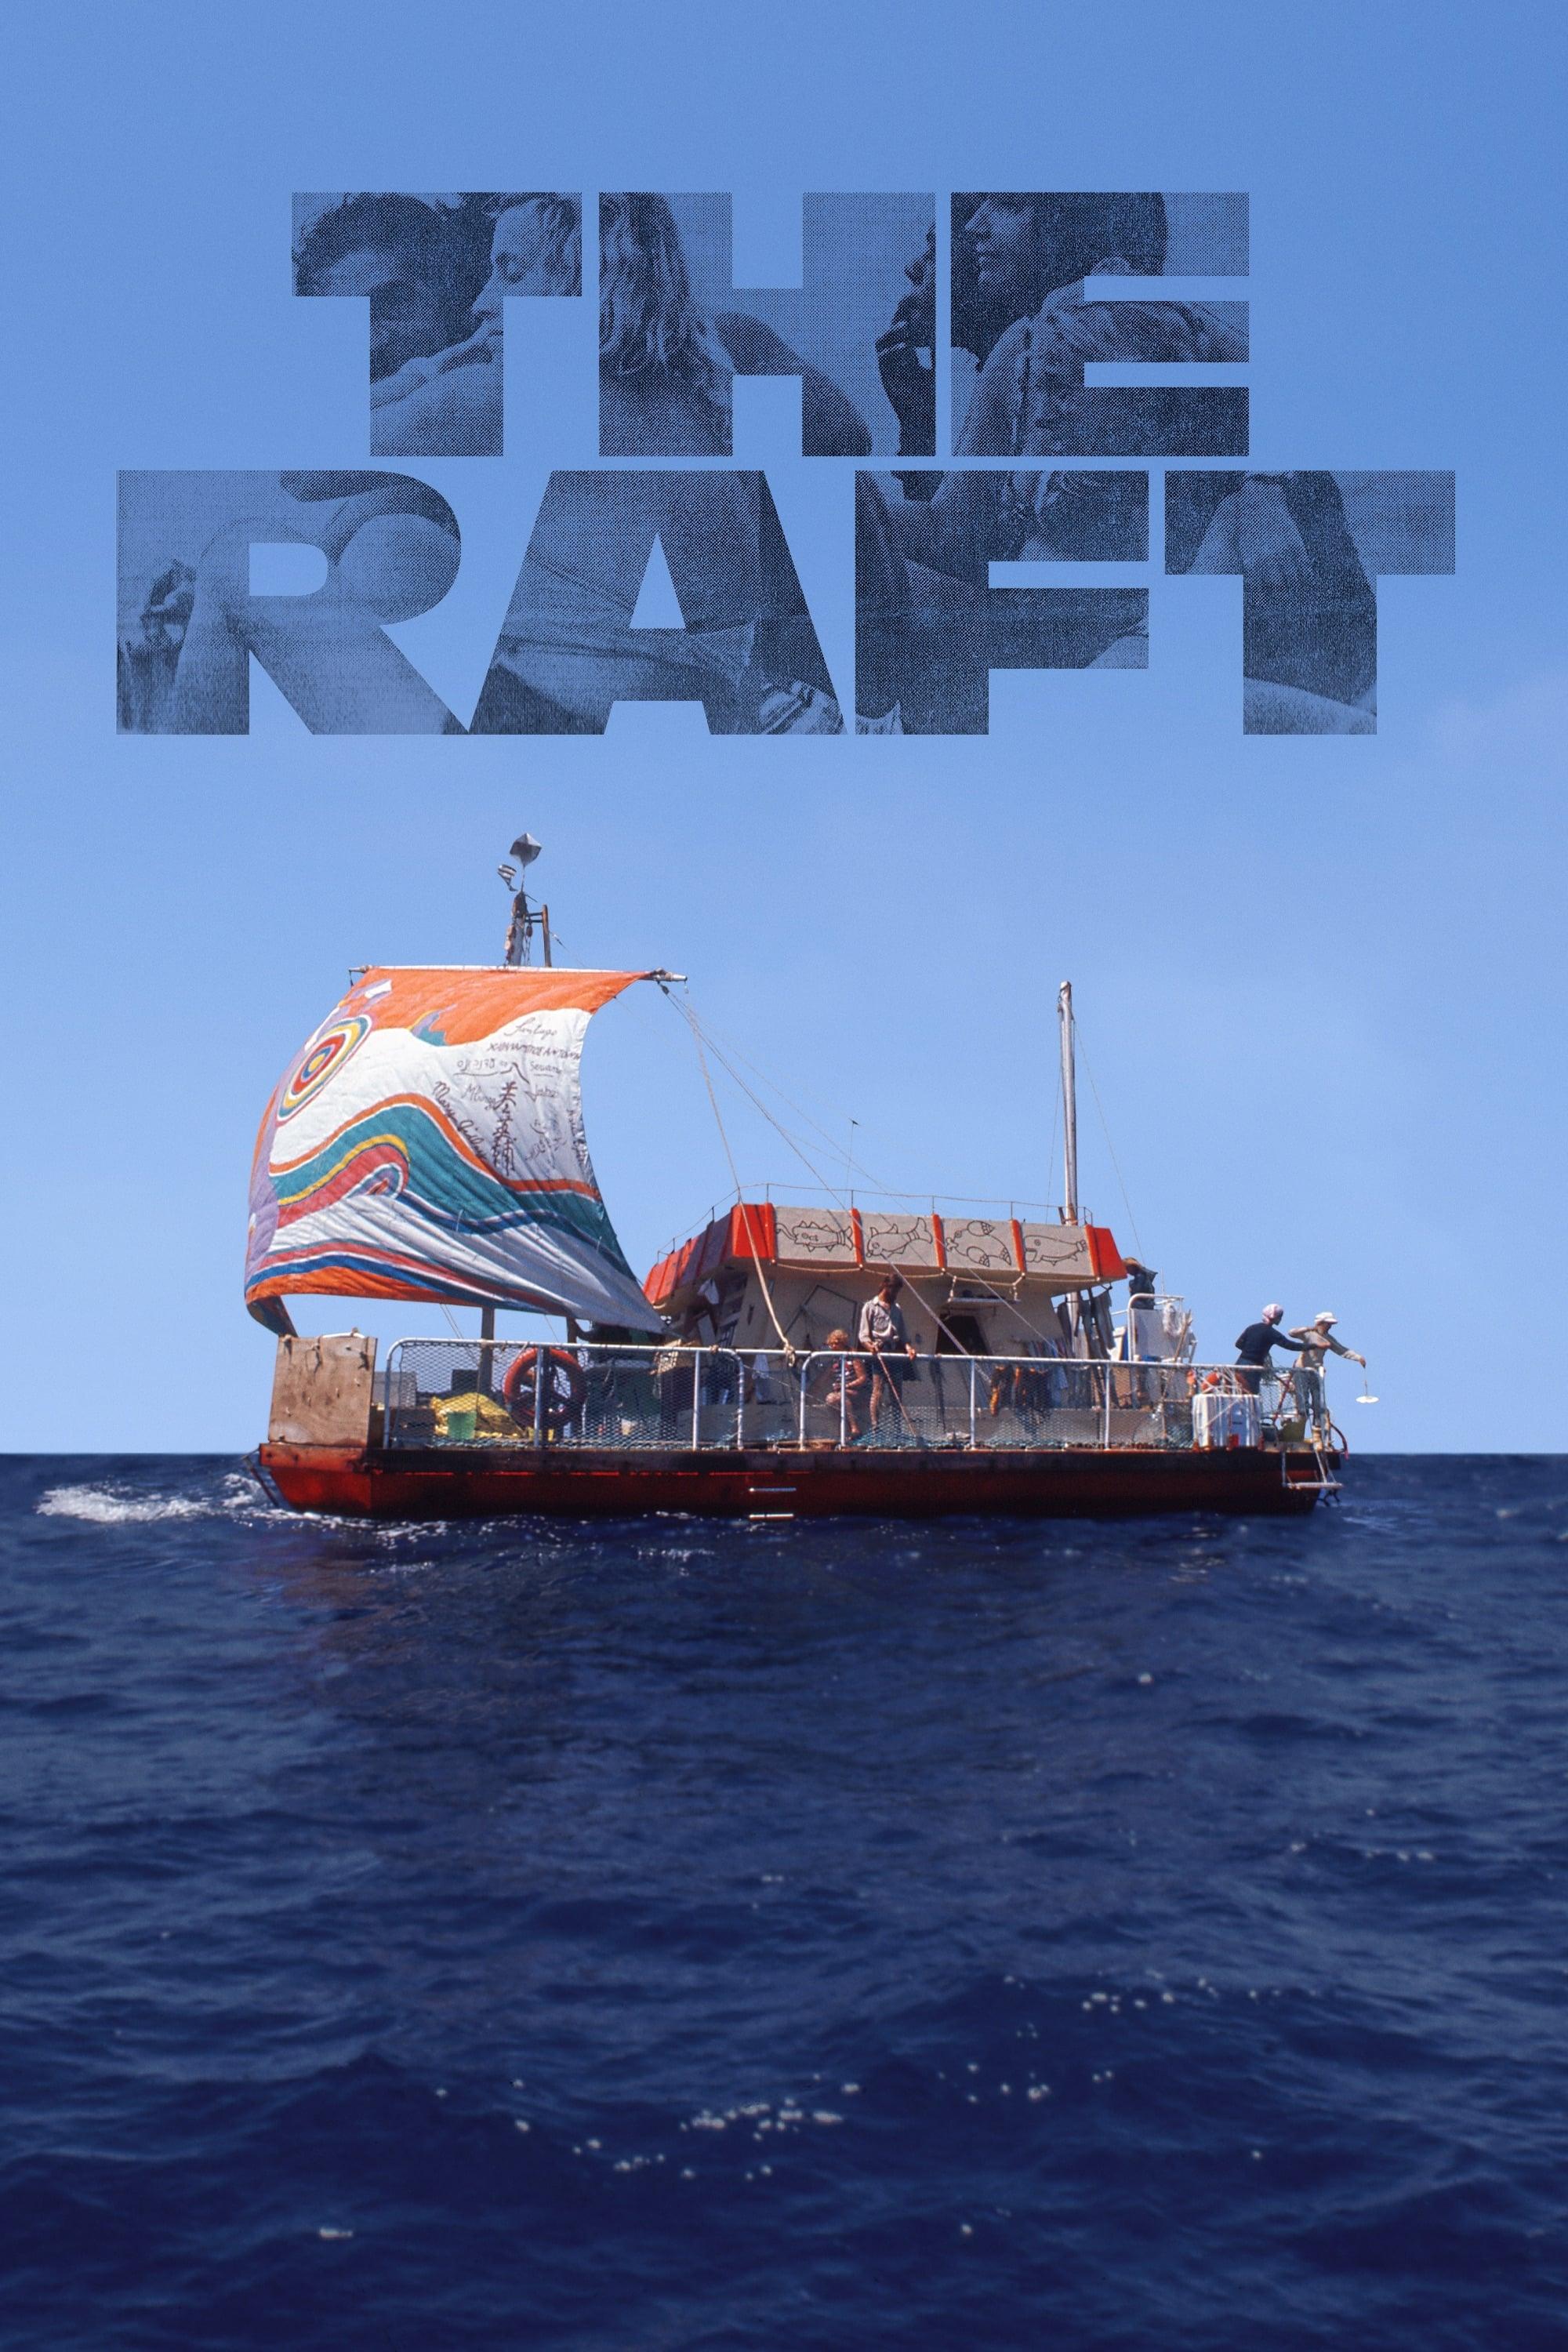 The Raft poster